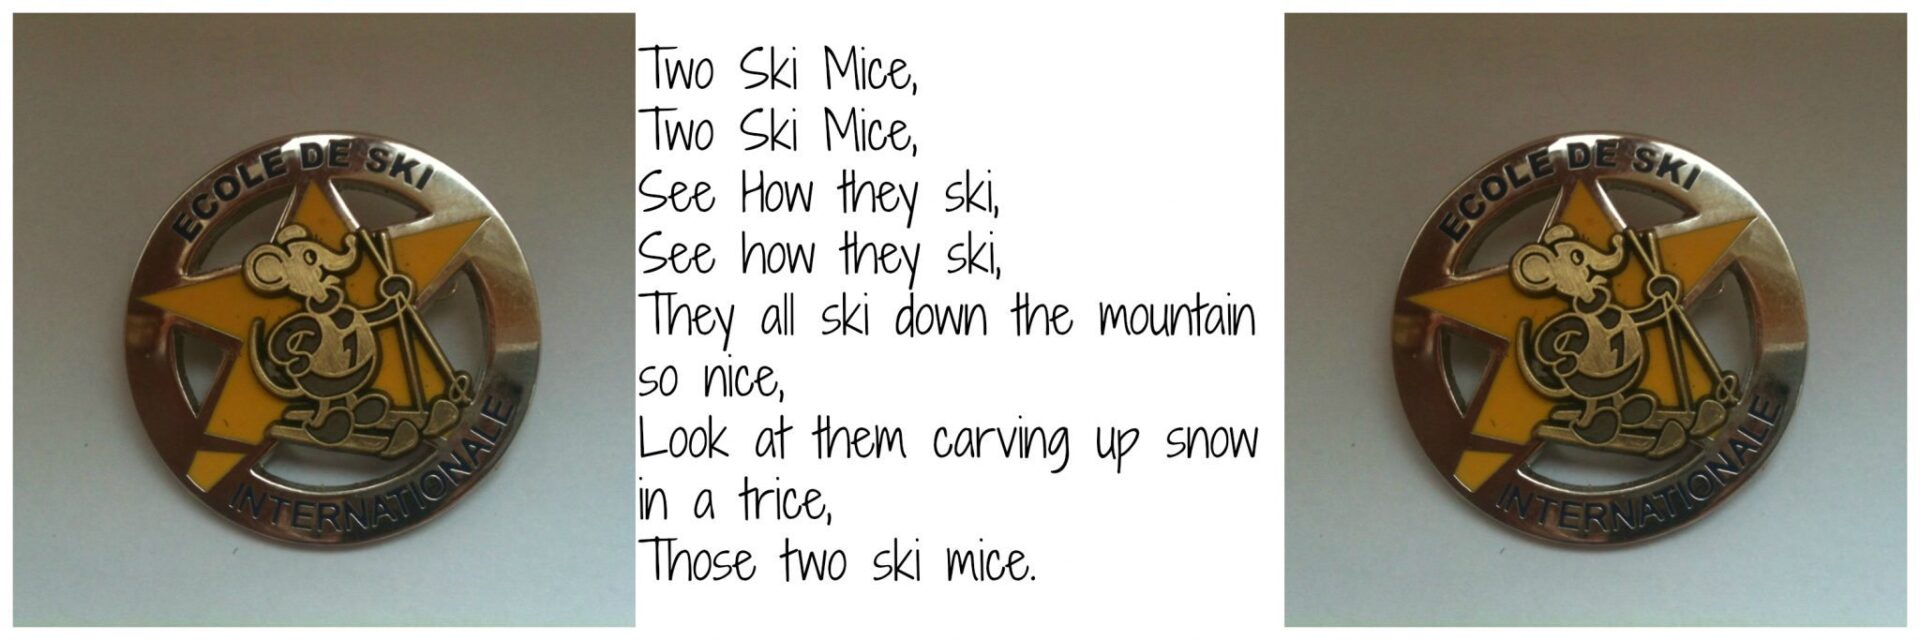 Skiing with kids: didn't they do well!